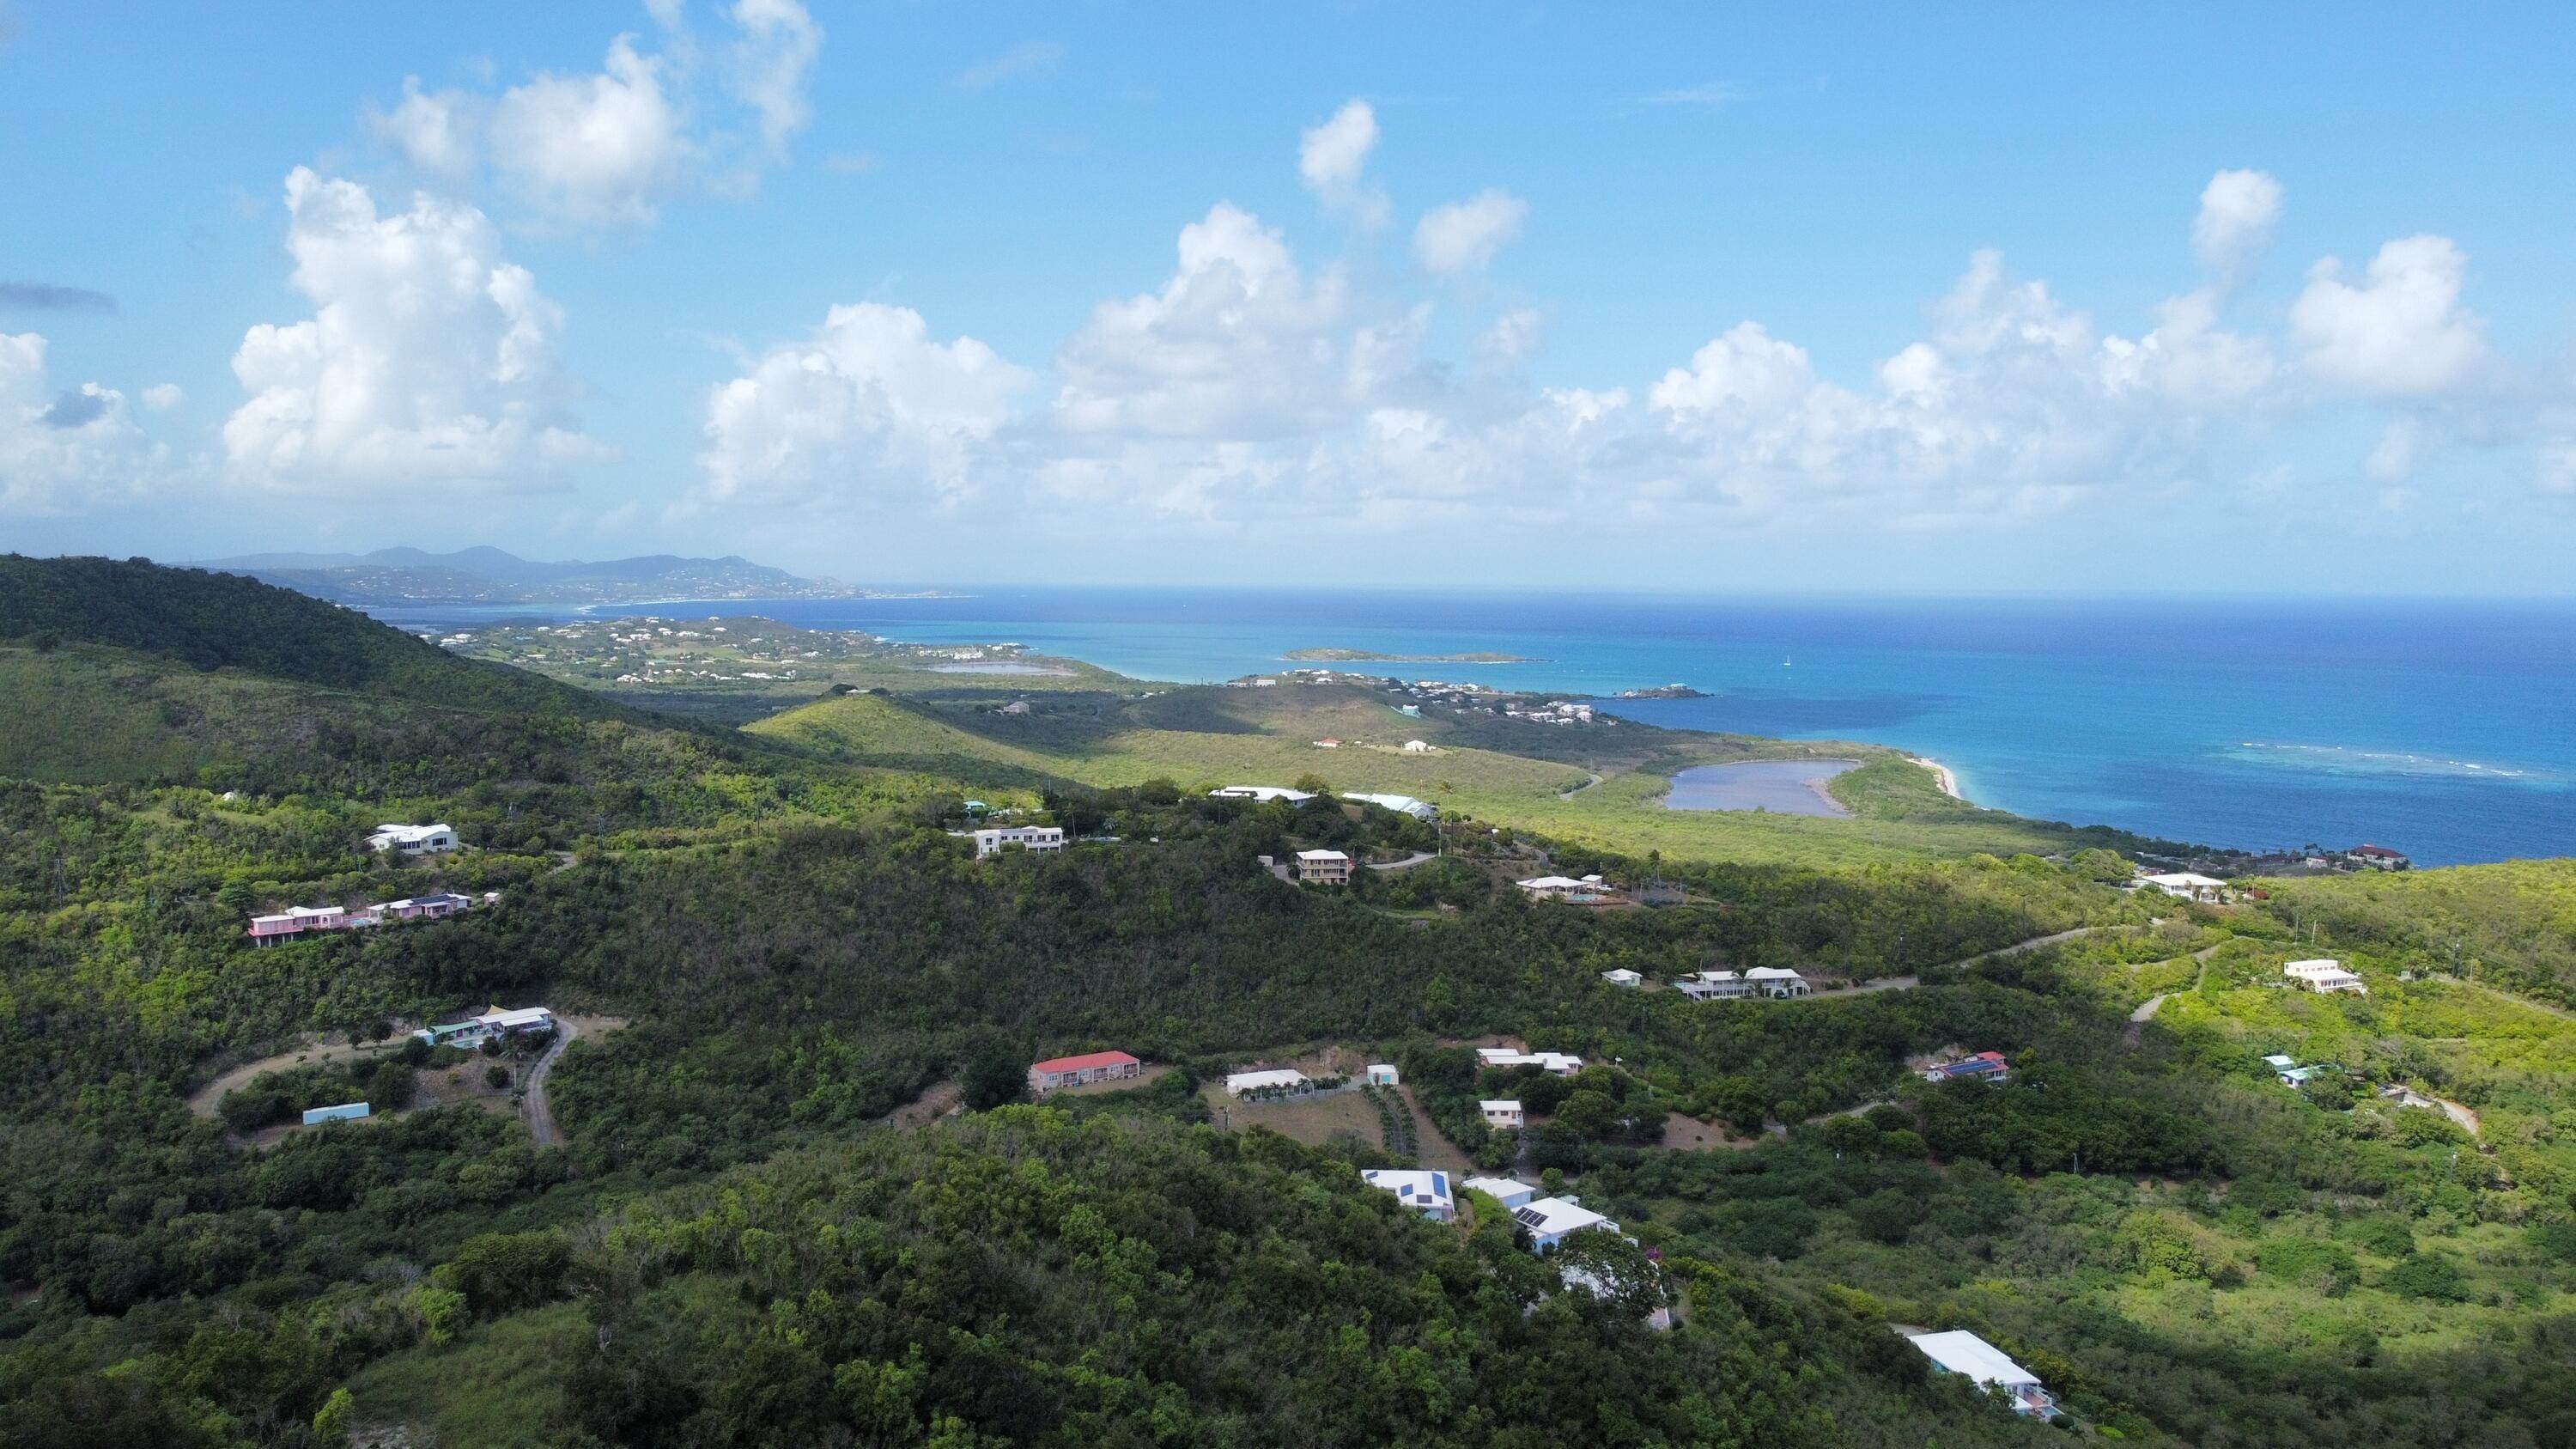 Multi-Family Homes for Sale at 133 Cotton Valley EB St Croix, Virgin Islands 00820 United States Virgin Islands